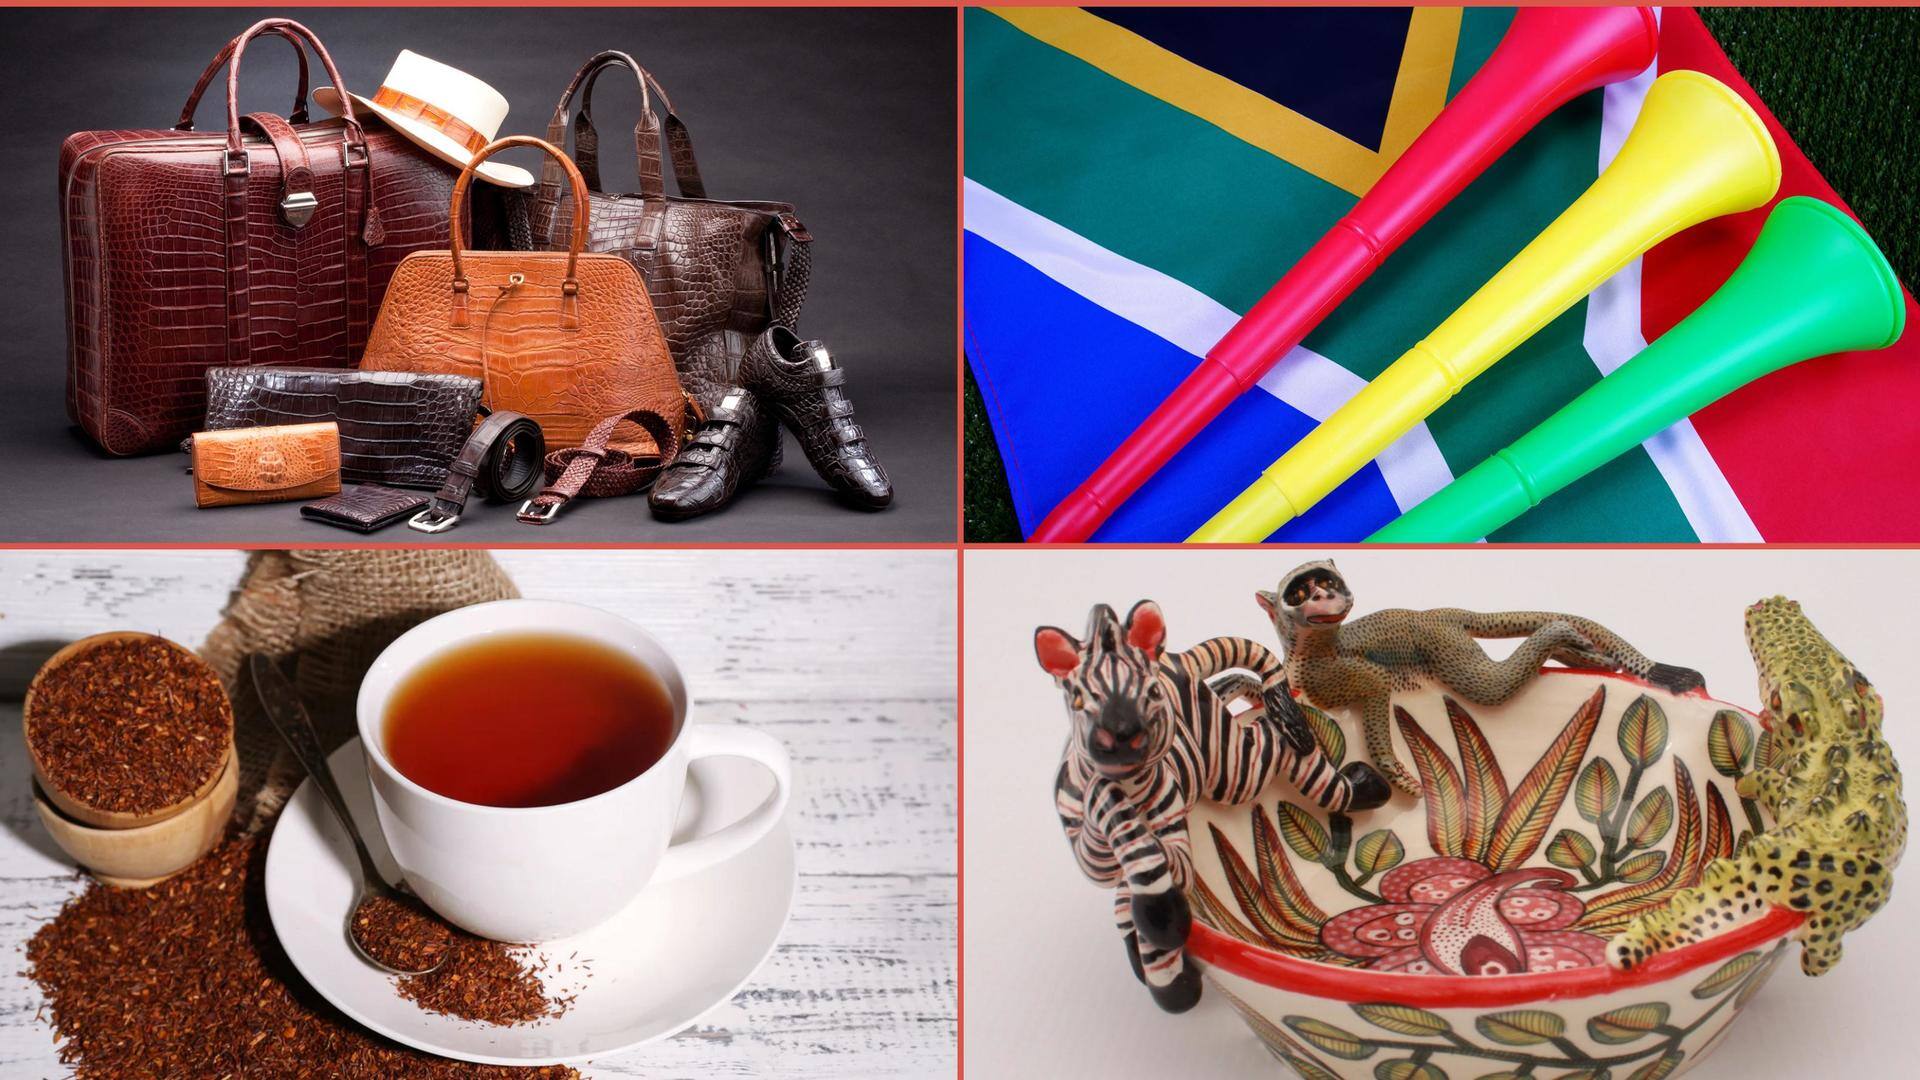 Visiting South Africa? Make sure to grab these souvenirs